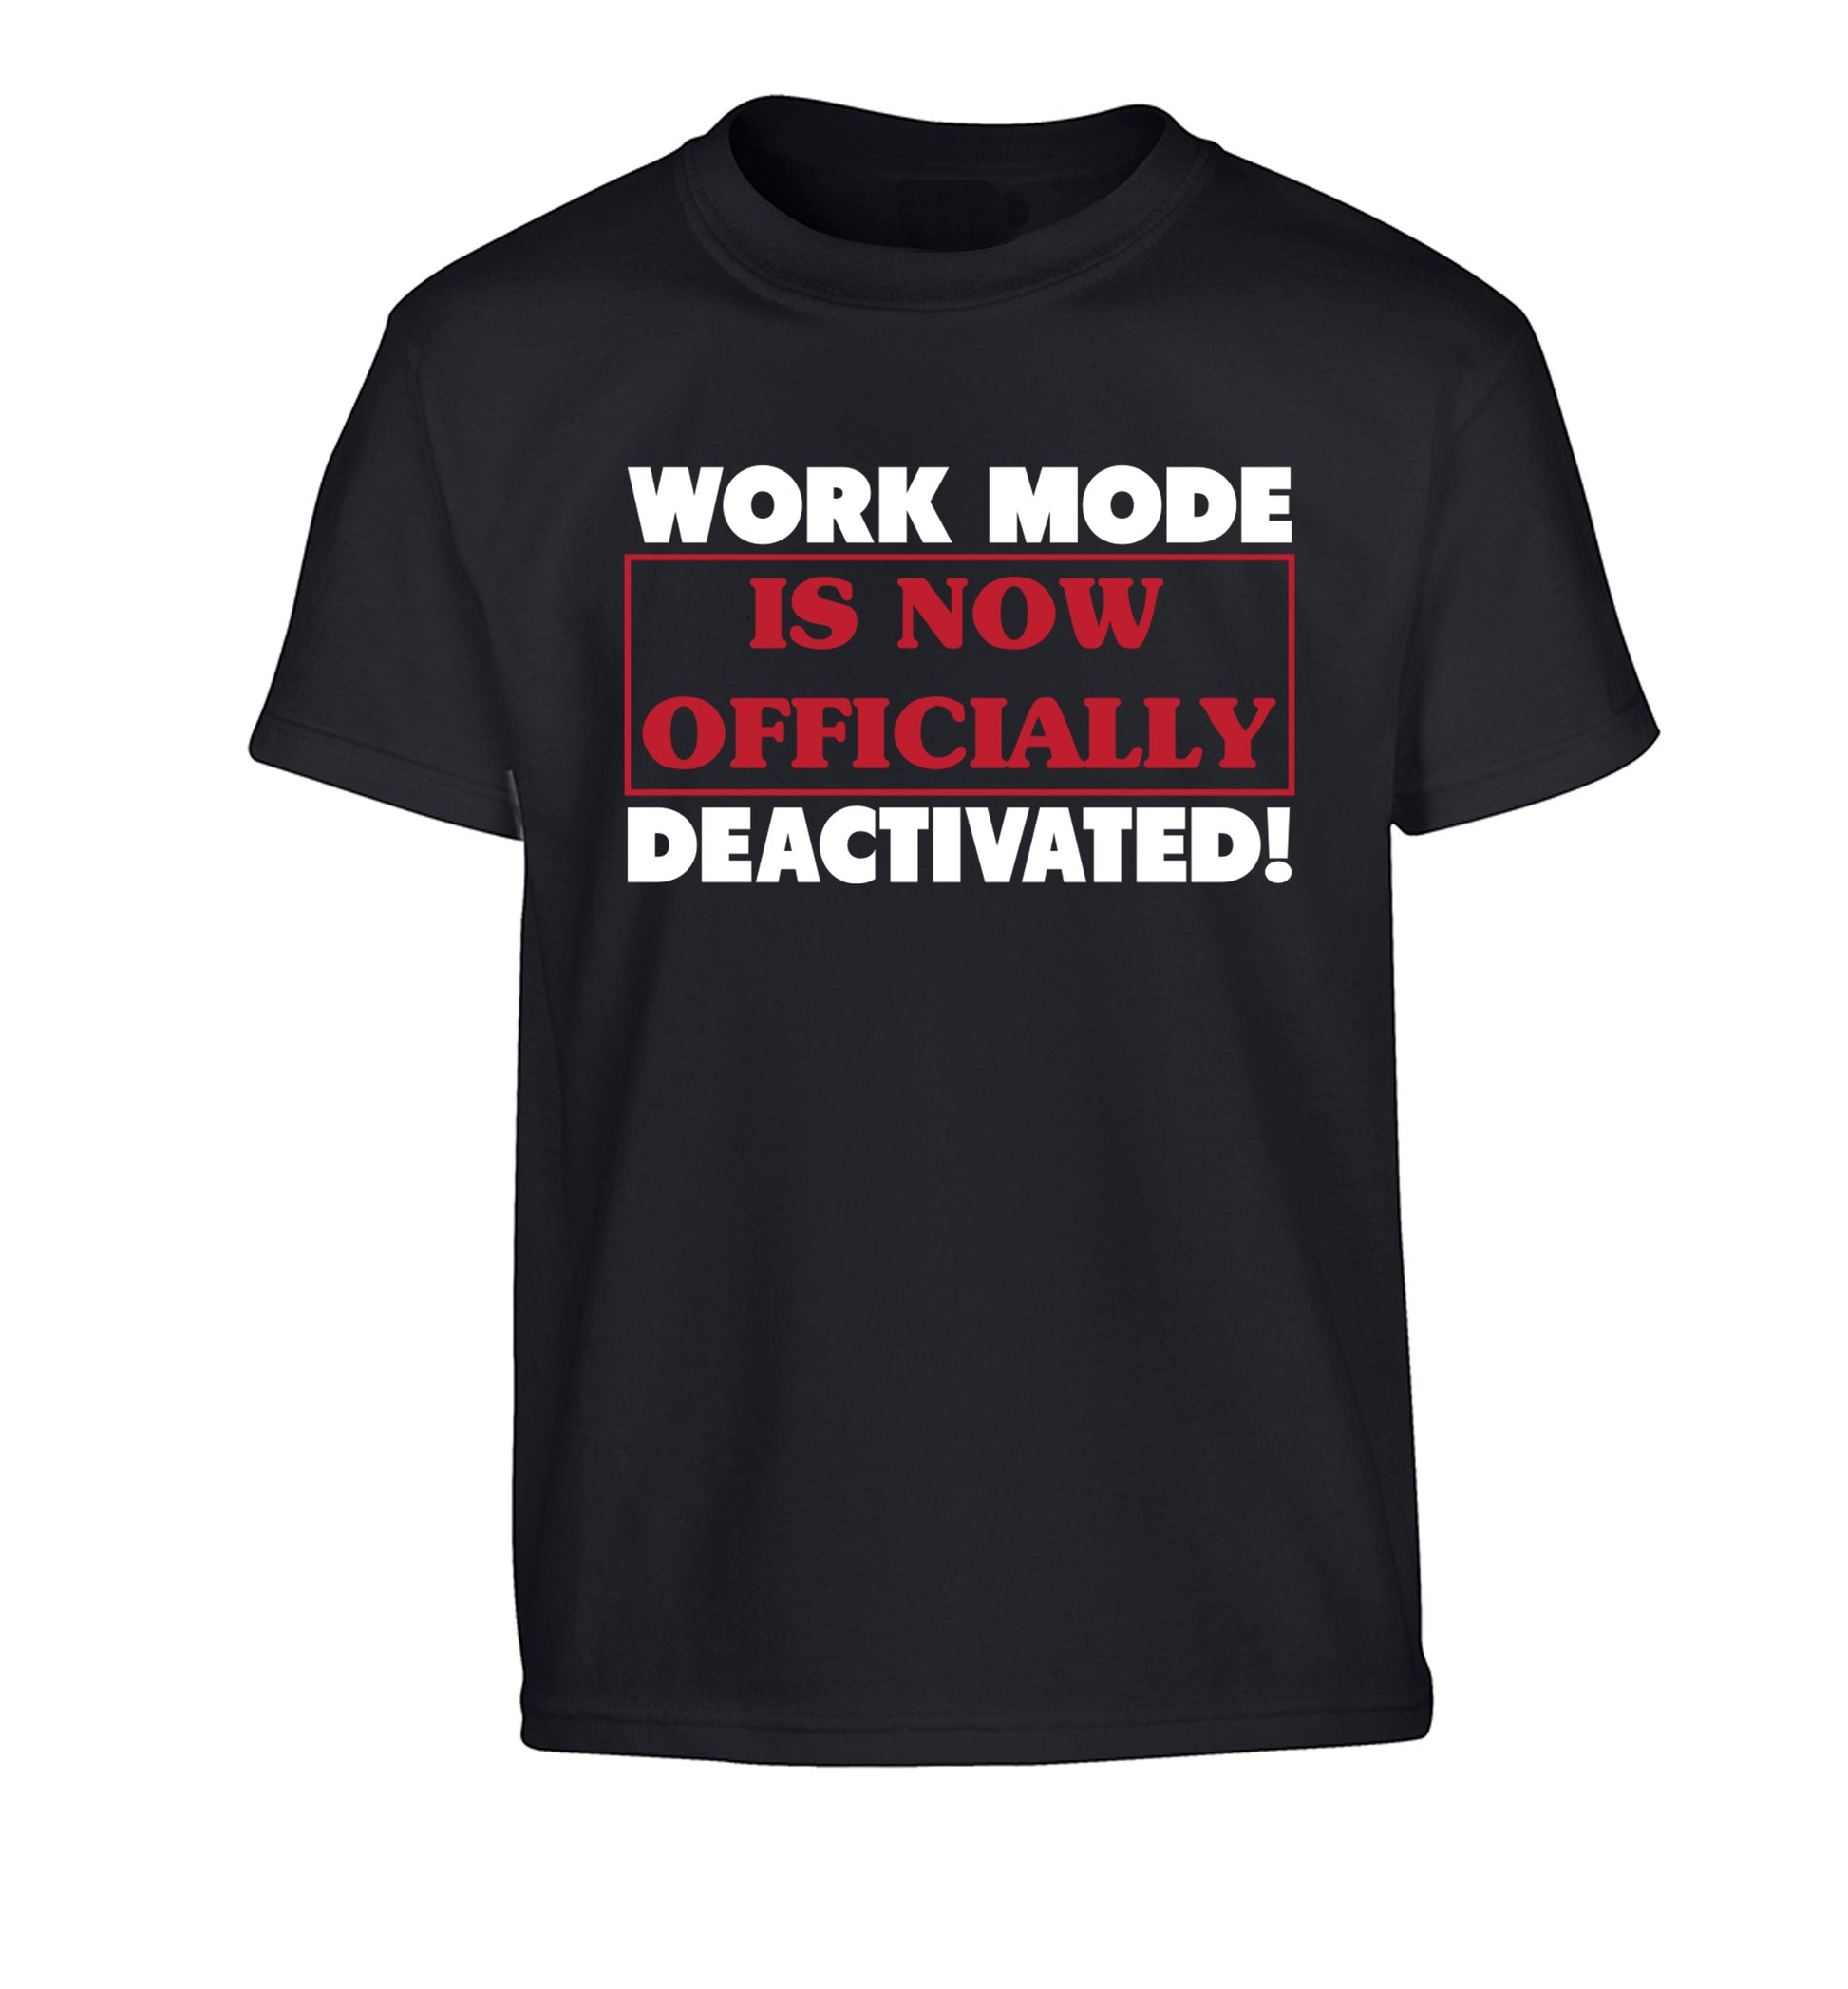 Work mode is now officially deactivated Children's black Tshirt 12-13 Years